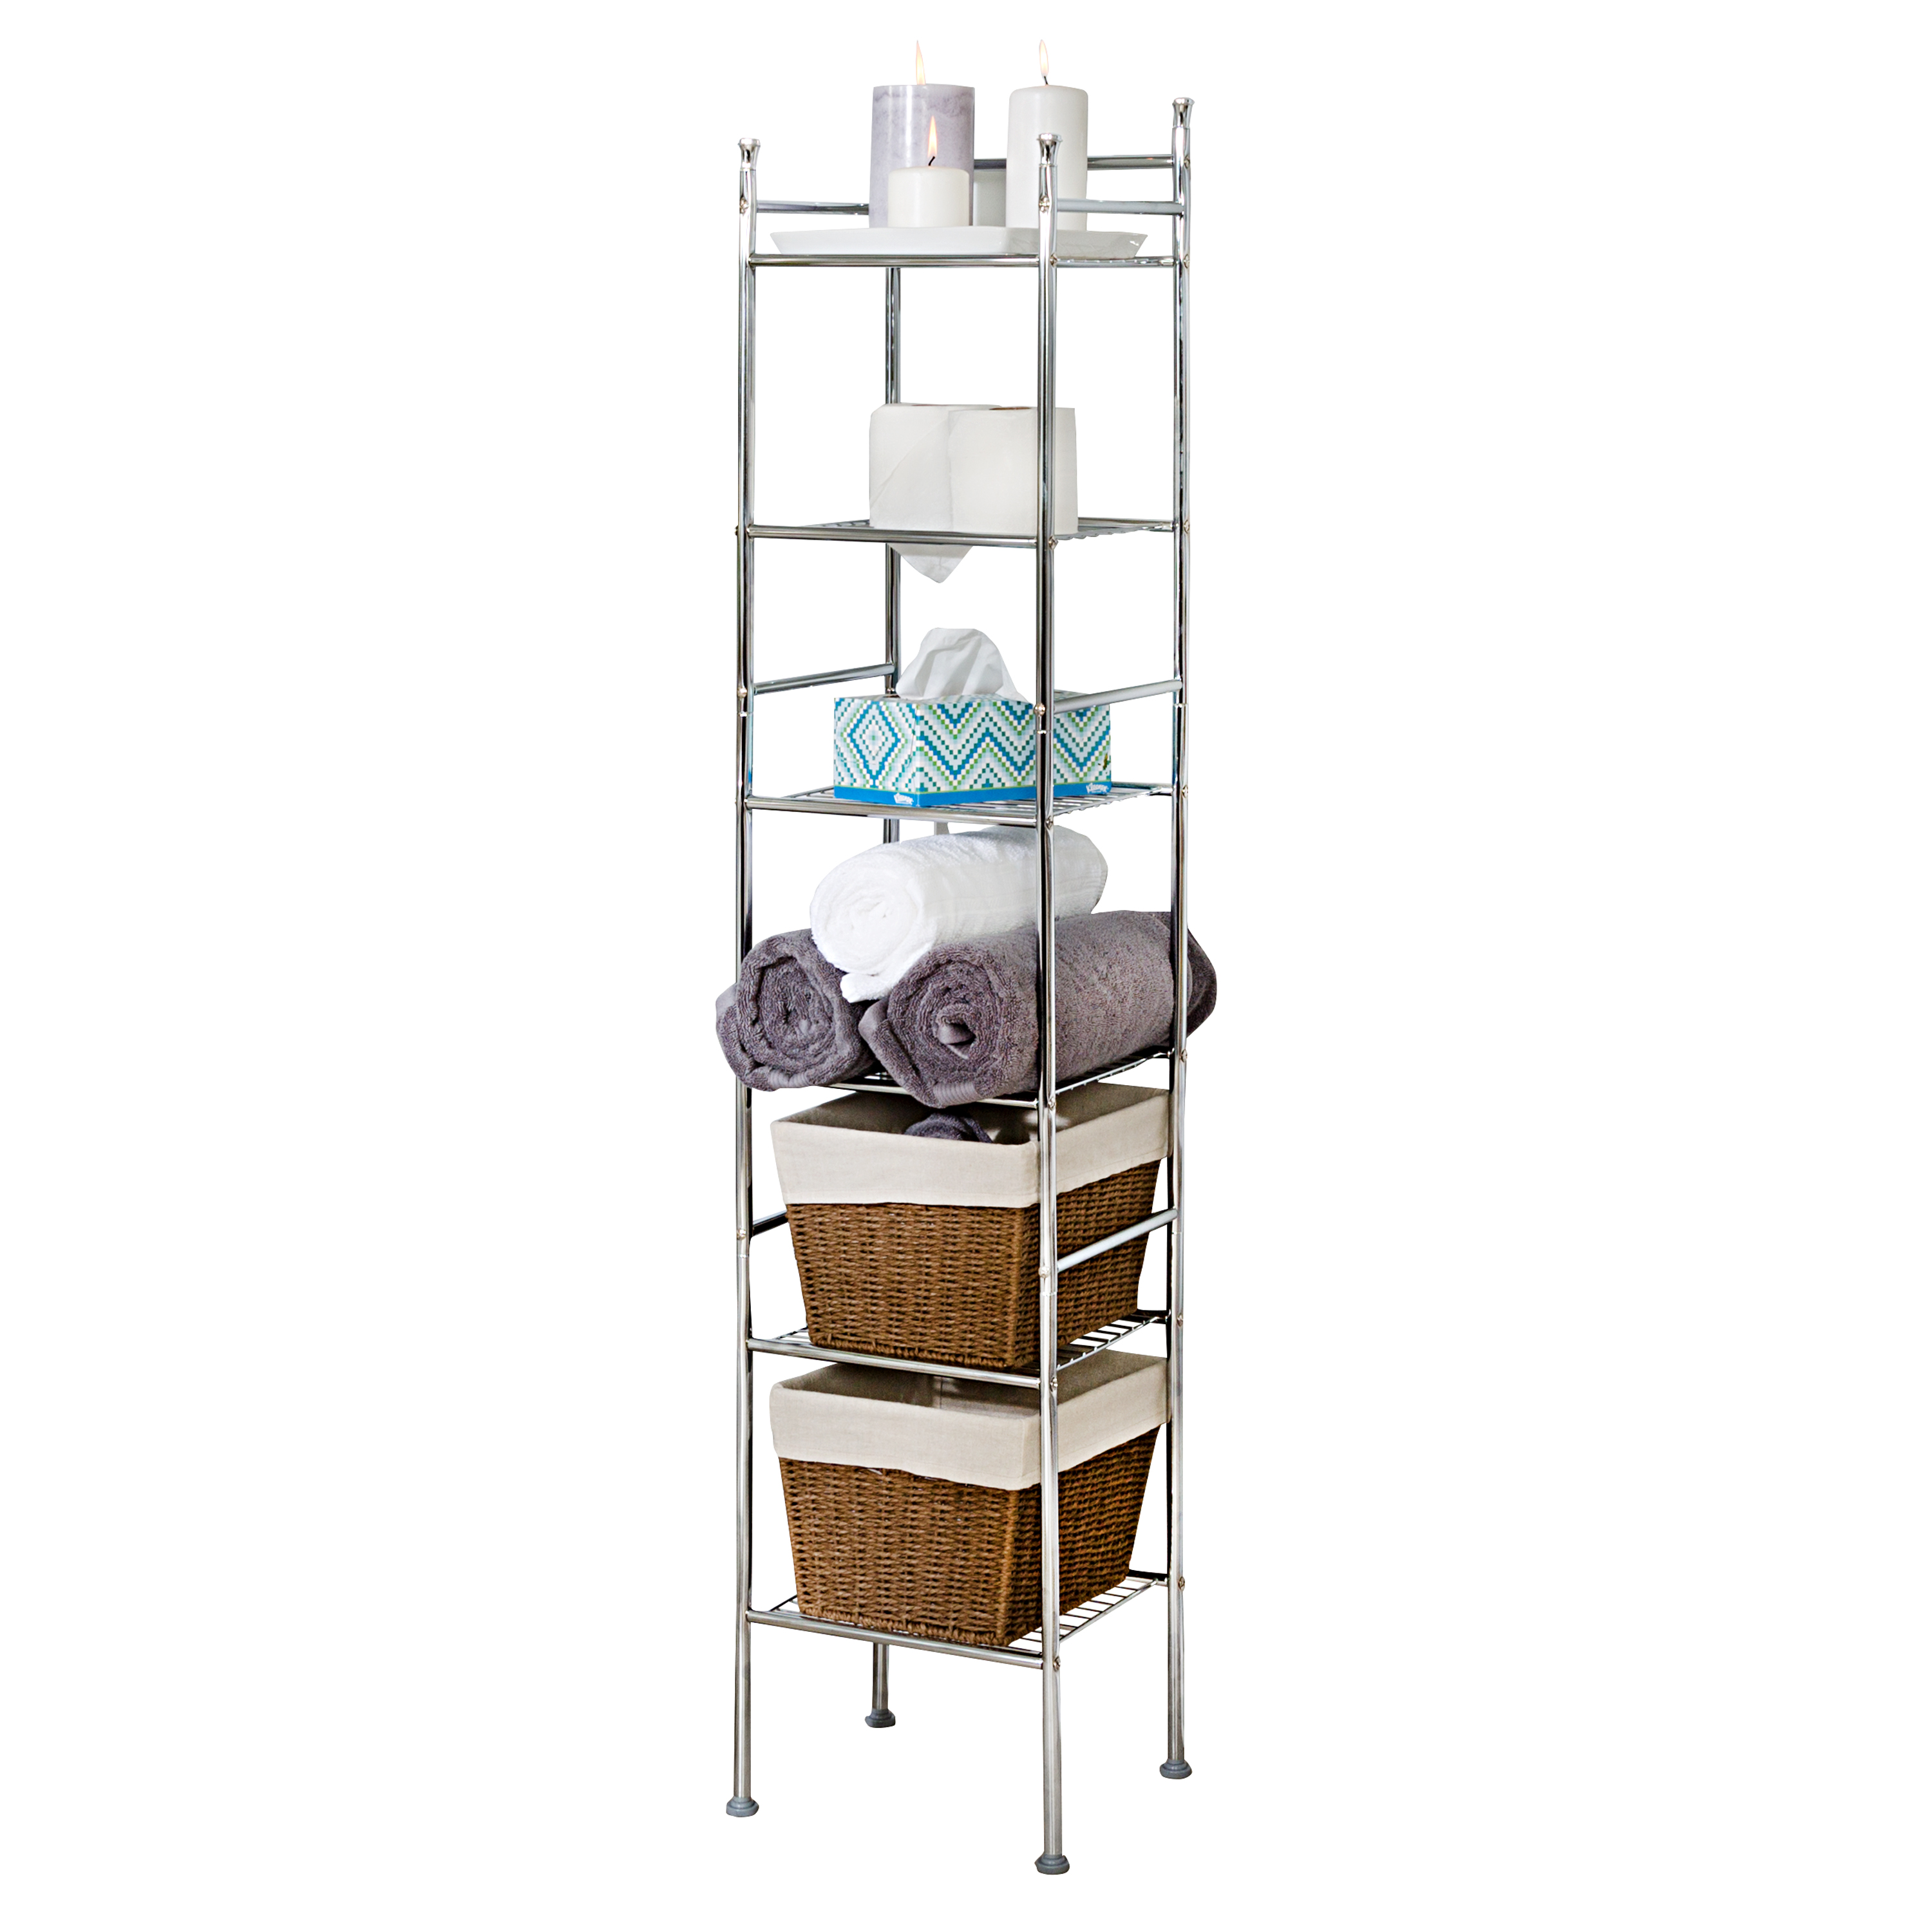 Honey-Can-Do Bath 6-Tier Steel Storage Tower, Chrome, Holds up to 10 lb per Shelf - image 3 of 5